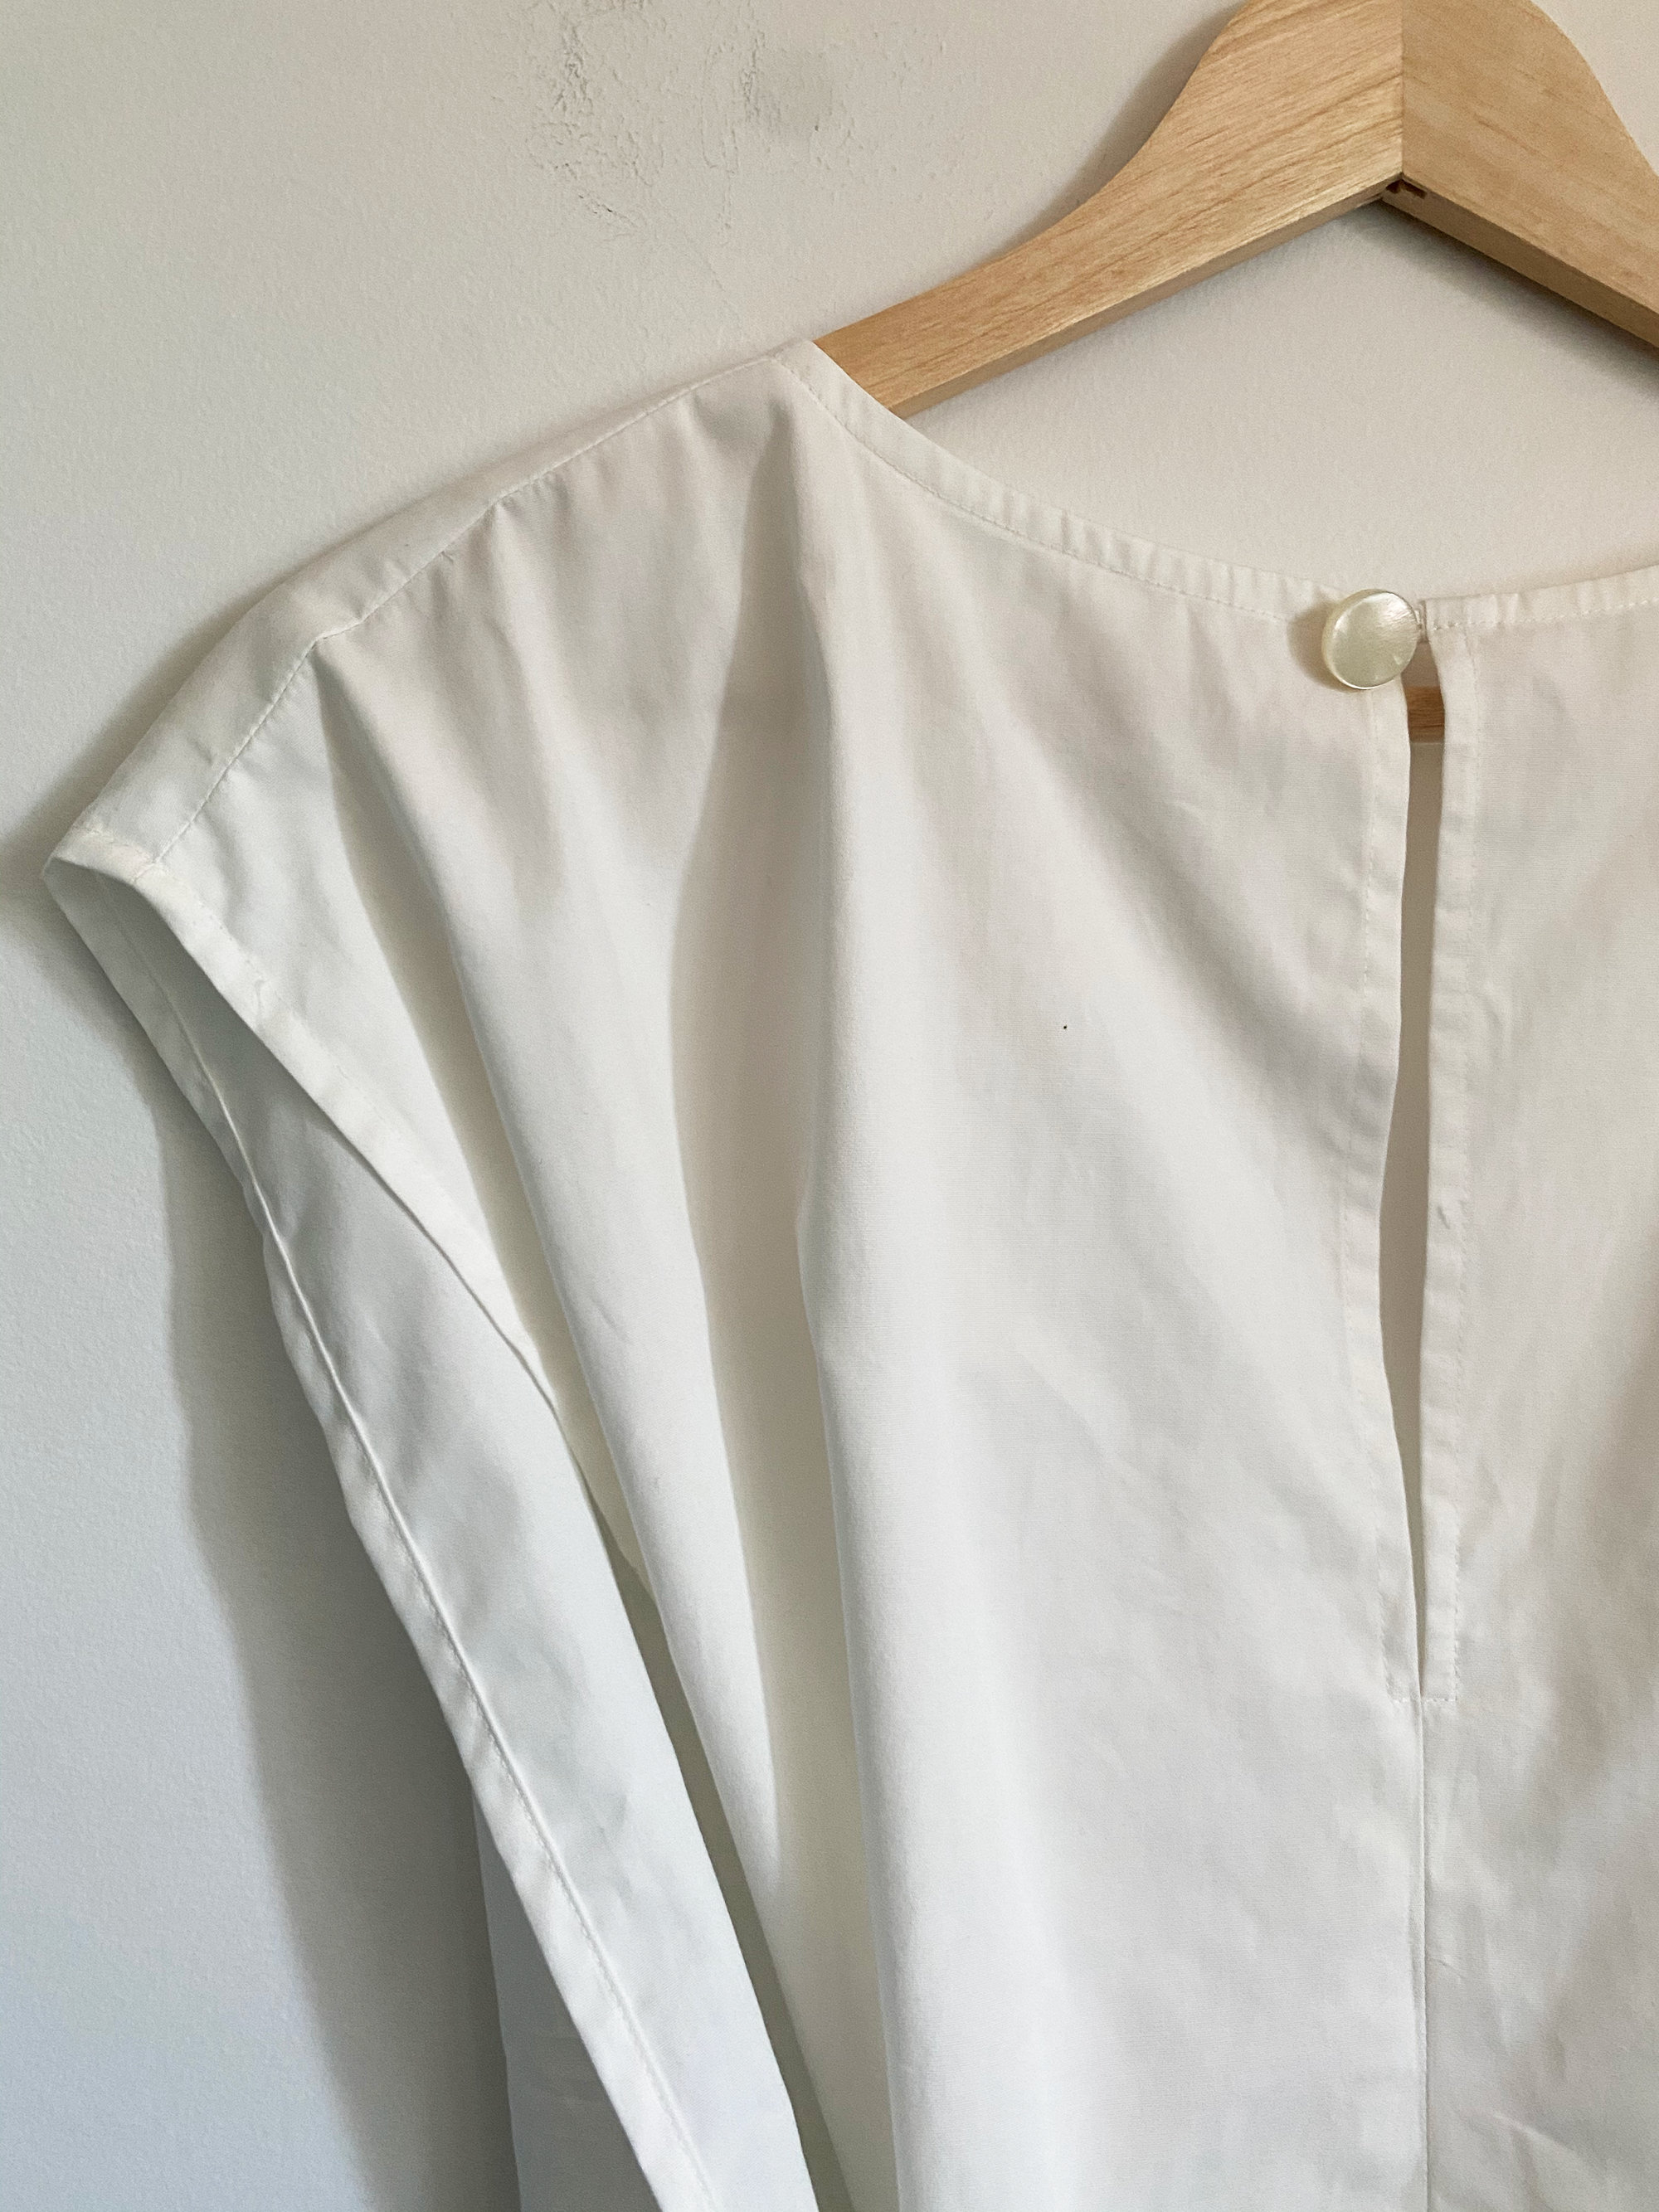 Cotton Poplin Wrap Top W/ Self Ties & Mother of Pearl Button - Etsy